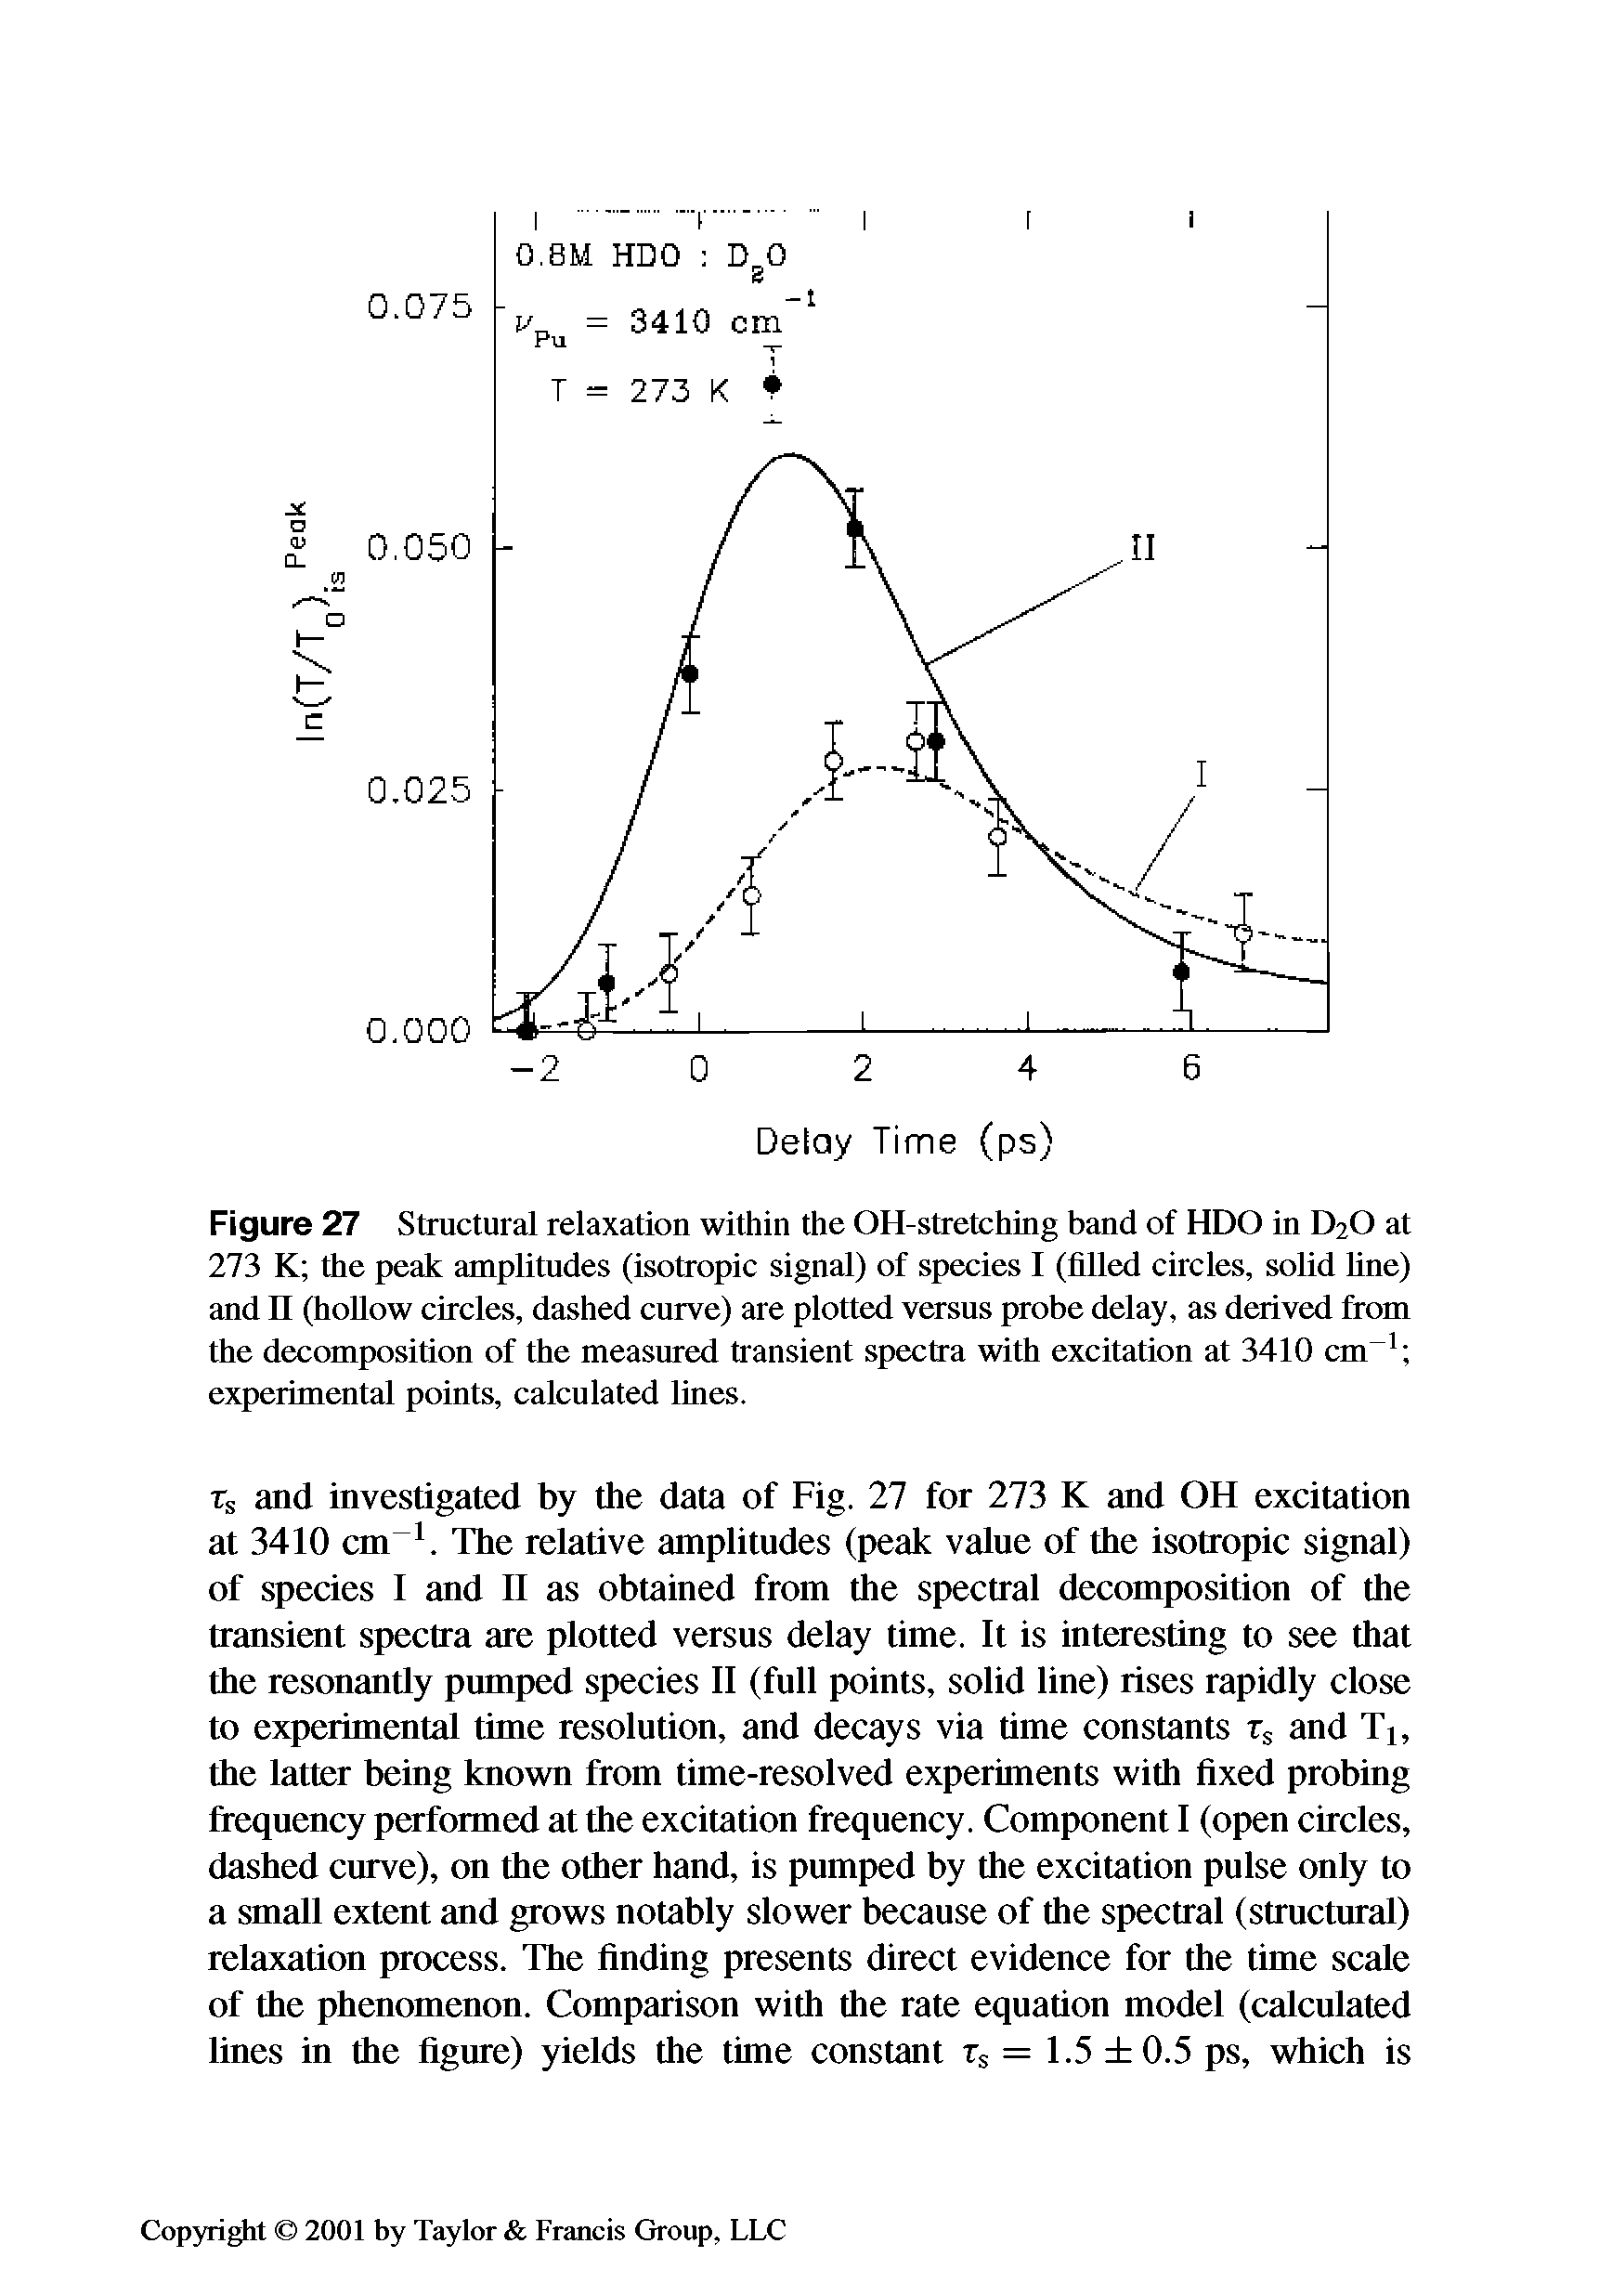 Figure 27 Structural relaxation within the OH-stretching band of HDO in D2O at 273 K the peak amplitudes (isotropic signal) of species I (filled circles, solid line) and II (hollow circles, dashed curve) are plotted versus probe delay, as derived from the decomposition of the measured transient spectra with excitation at 3410 cm-1 experimental points, calculated lines.